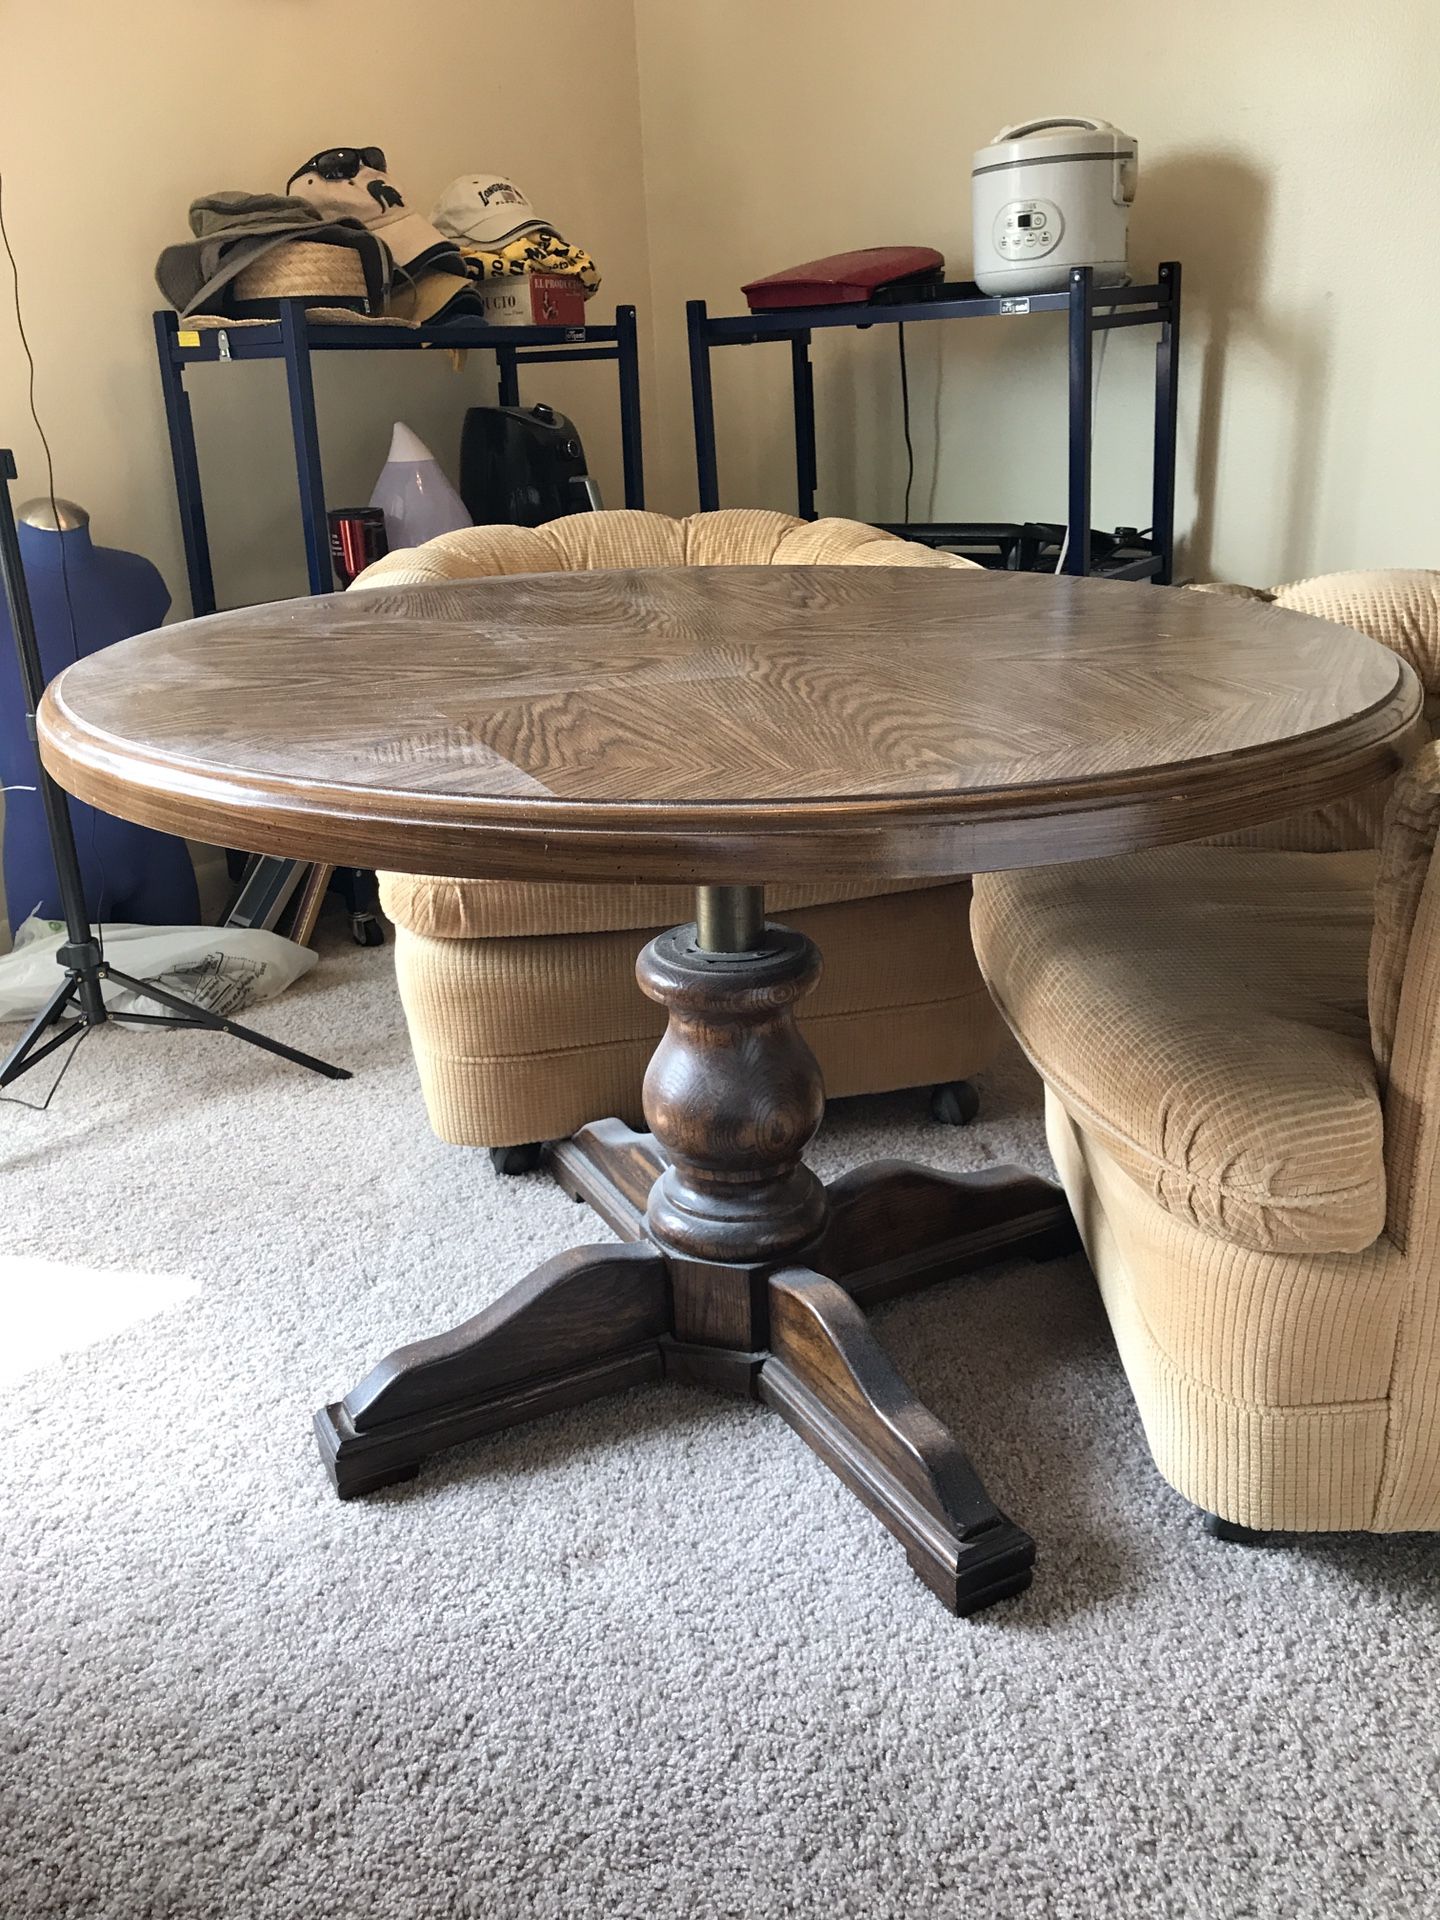 Elegant Wooden Game/Coffee Table With 4 Chairs